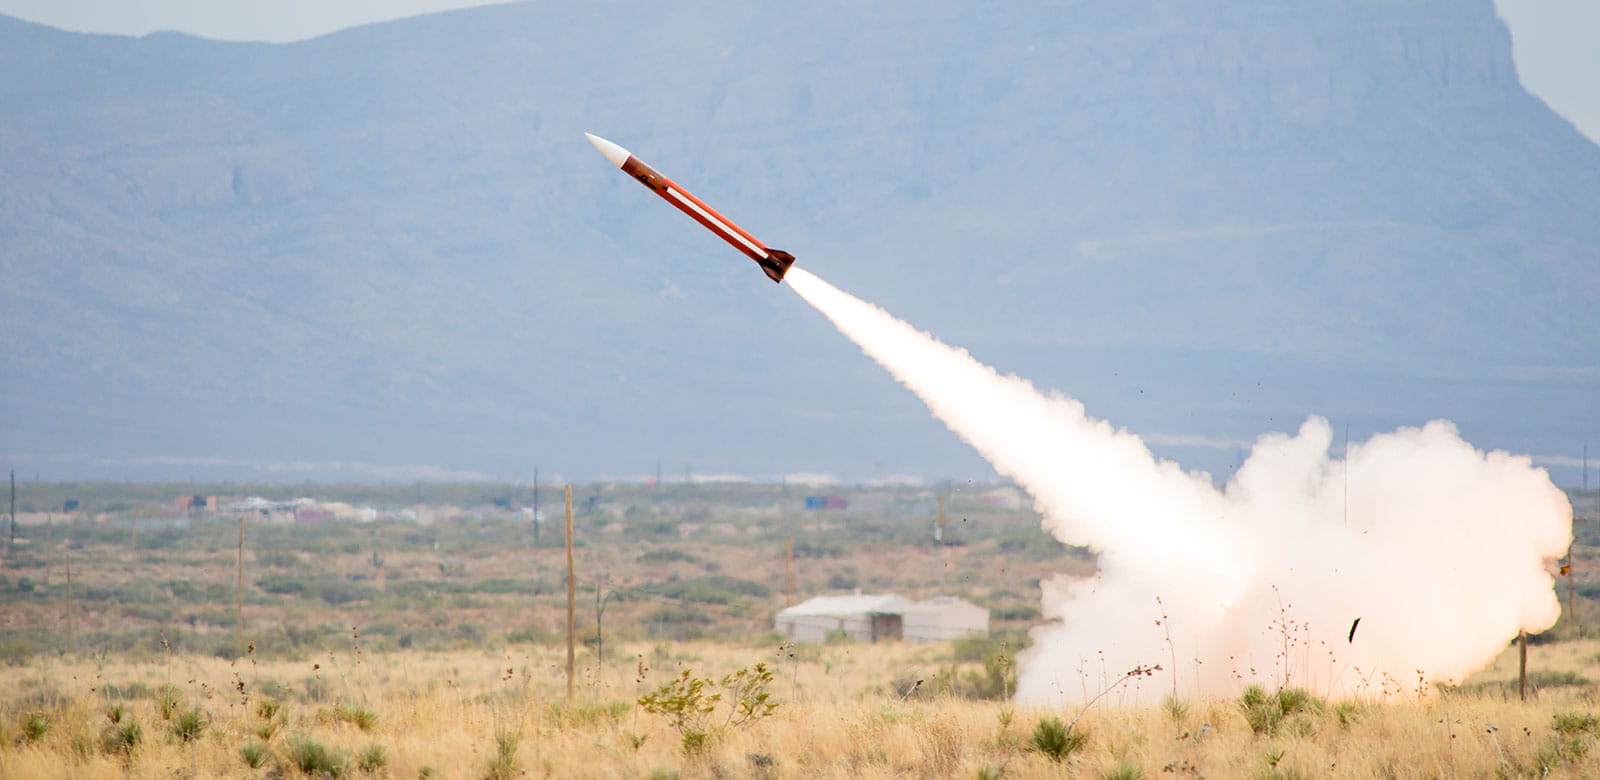 Patriot Guidance Enhanced Missile being deployed